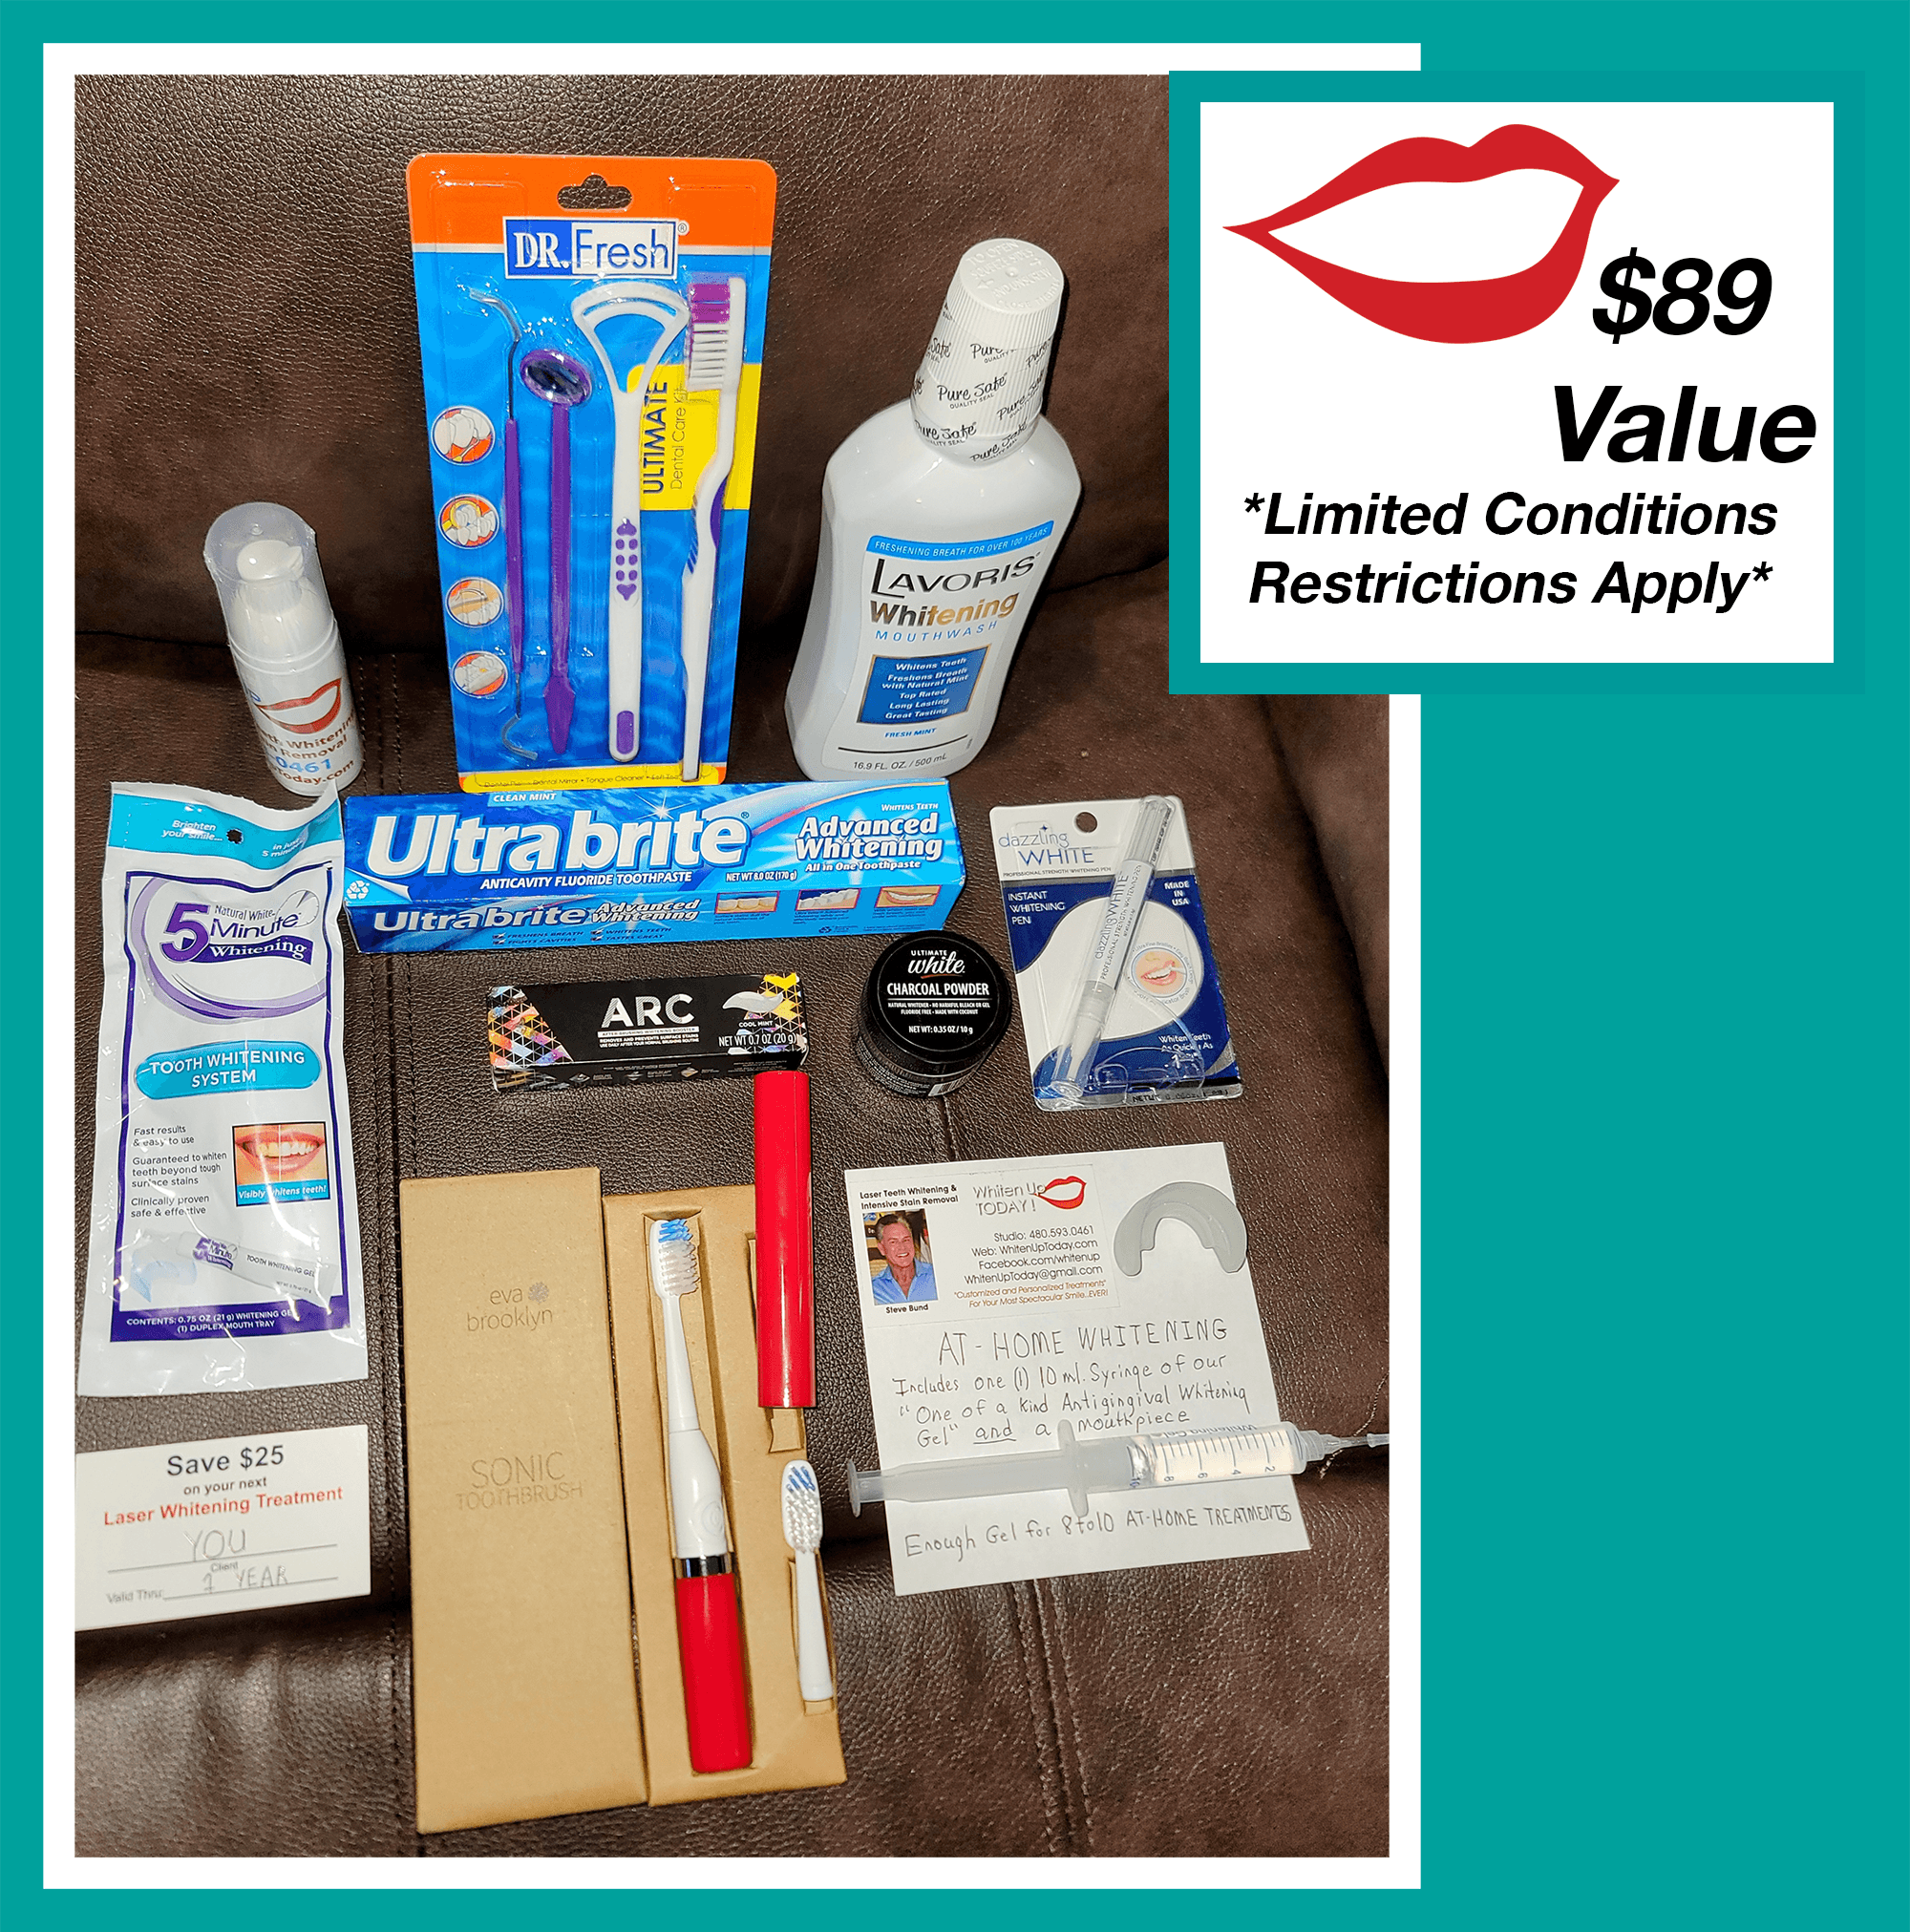 Image of 10 free items given with initial booking. Slim sonic electric toothbrush and various other oral care items.